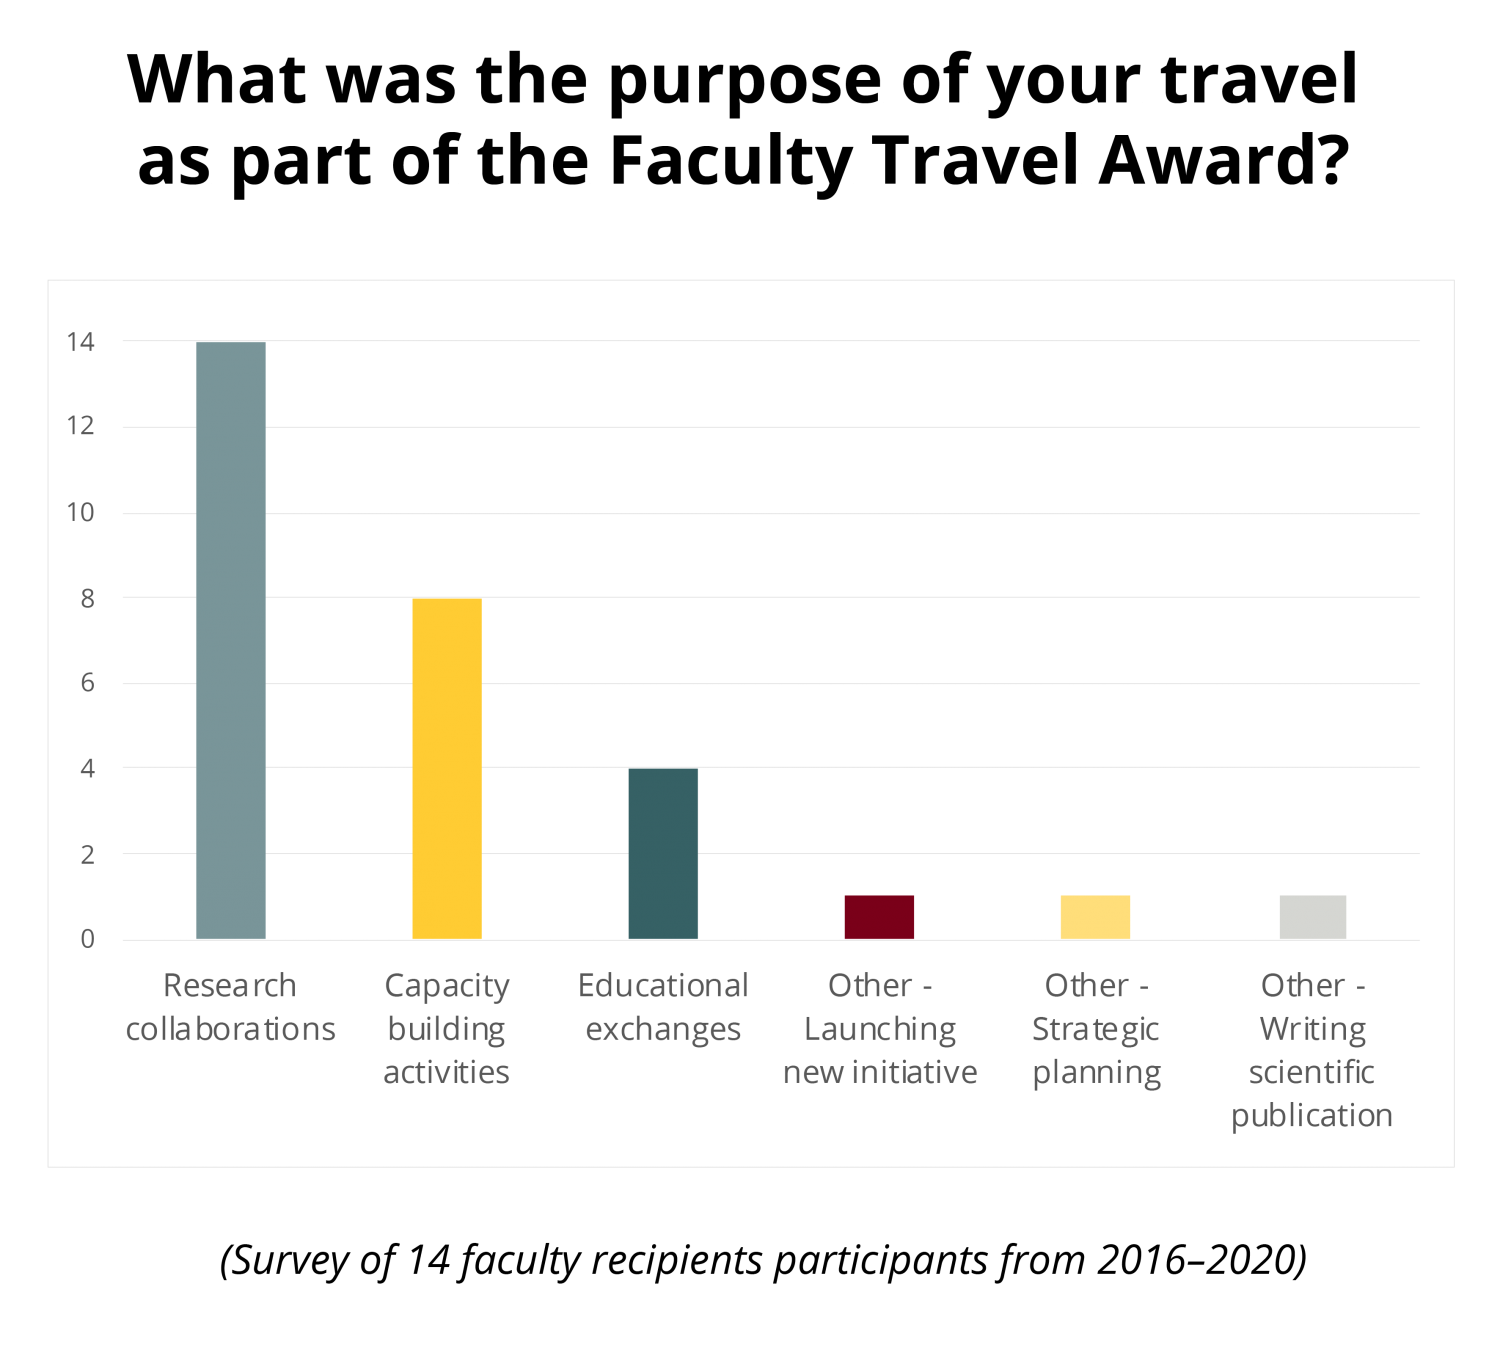 Bar chart with title "What was the purpose of your travel as part of the Faculty Trave Award?" Responses include Research Collaborations (14), Capacity Building activities (8), and Educational Exchanges (4)